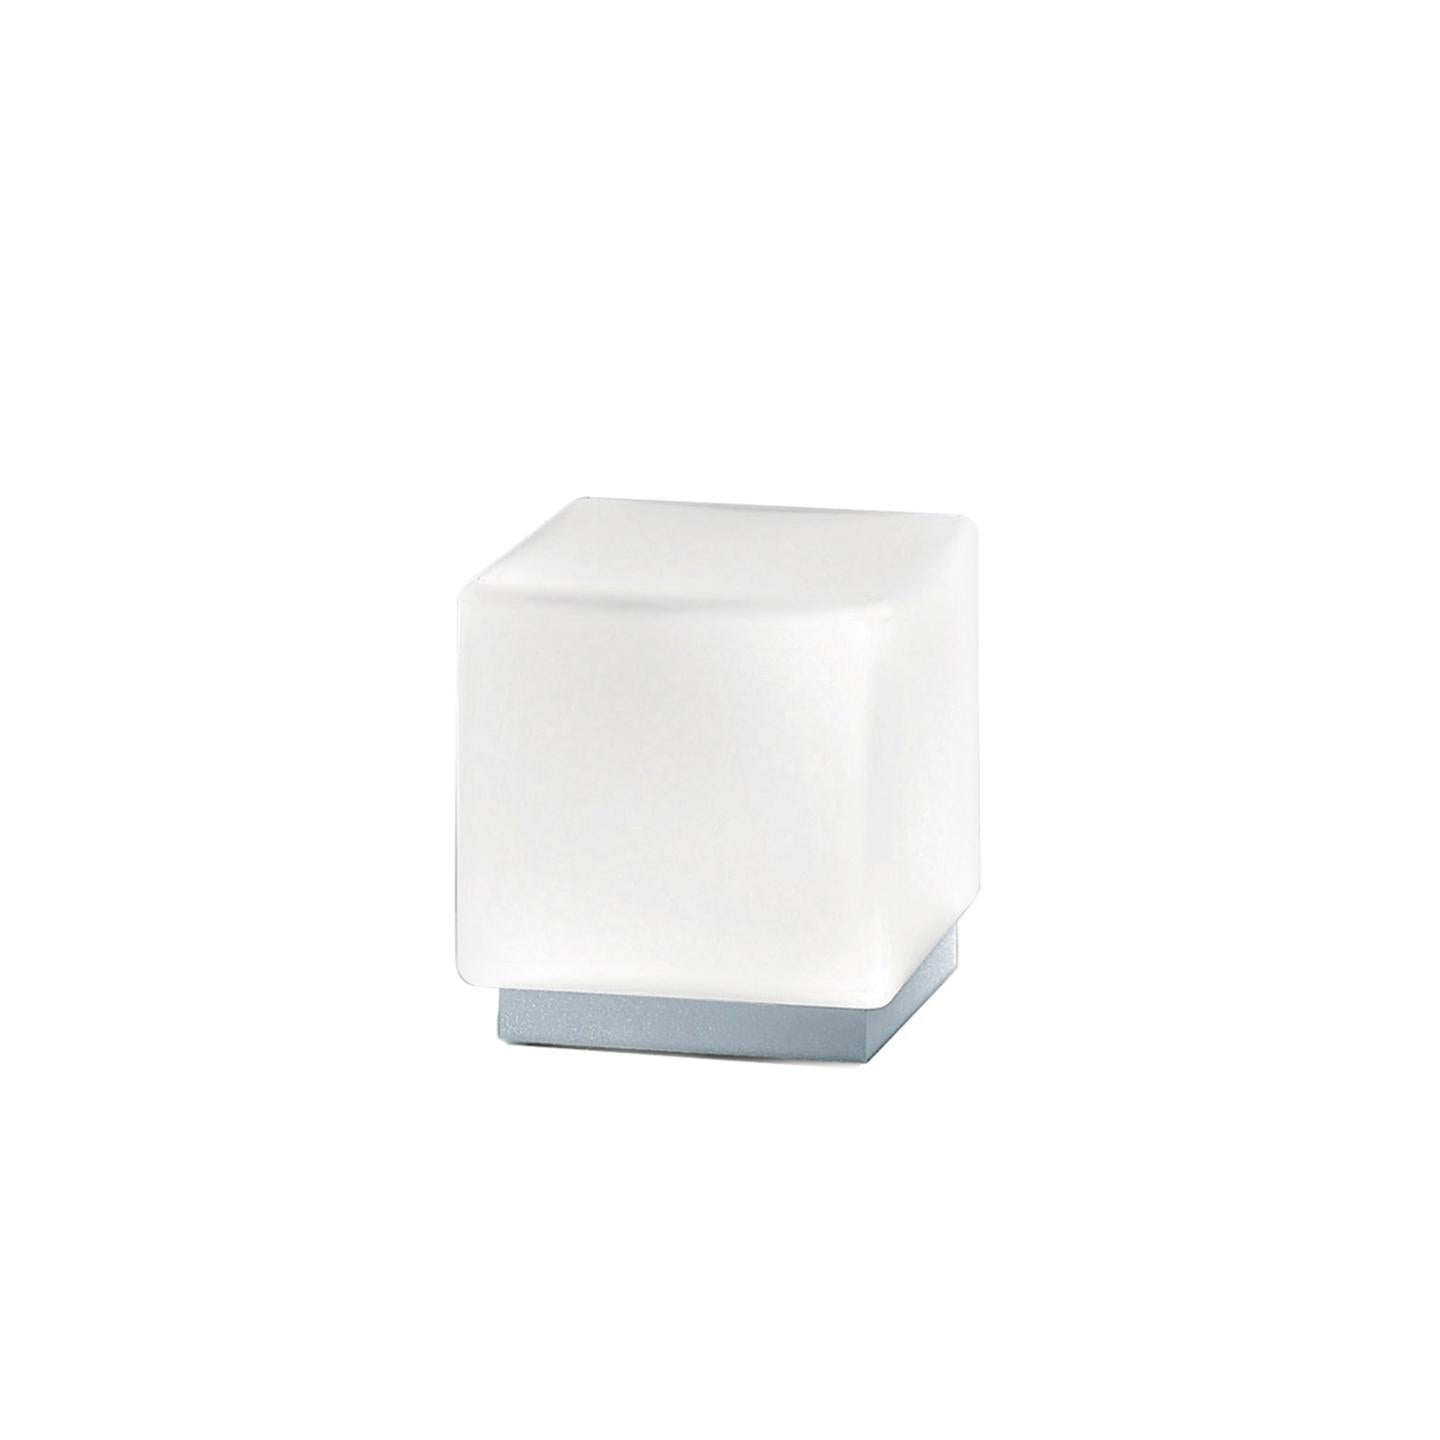 The Cubi Table Lamp, designed in 2000, is an icon of Leucos. Its cubic form is surprising for handmade glass, which makes it a delightful lamp. Its hand-blown satin white diffuser is made of multiple layers of glass to create a rich, white look.